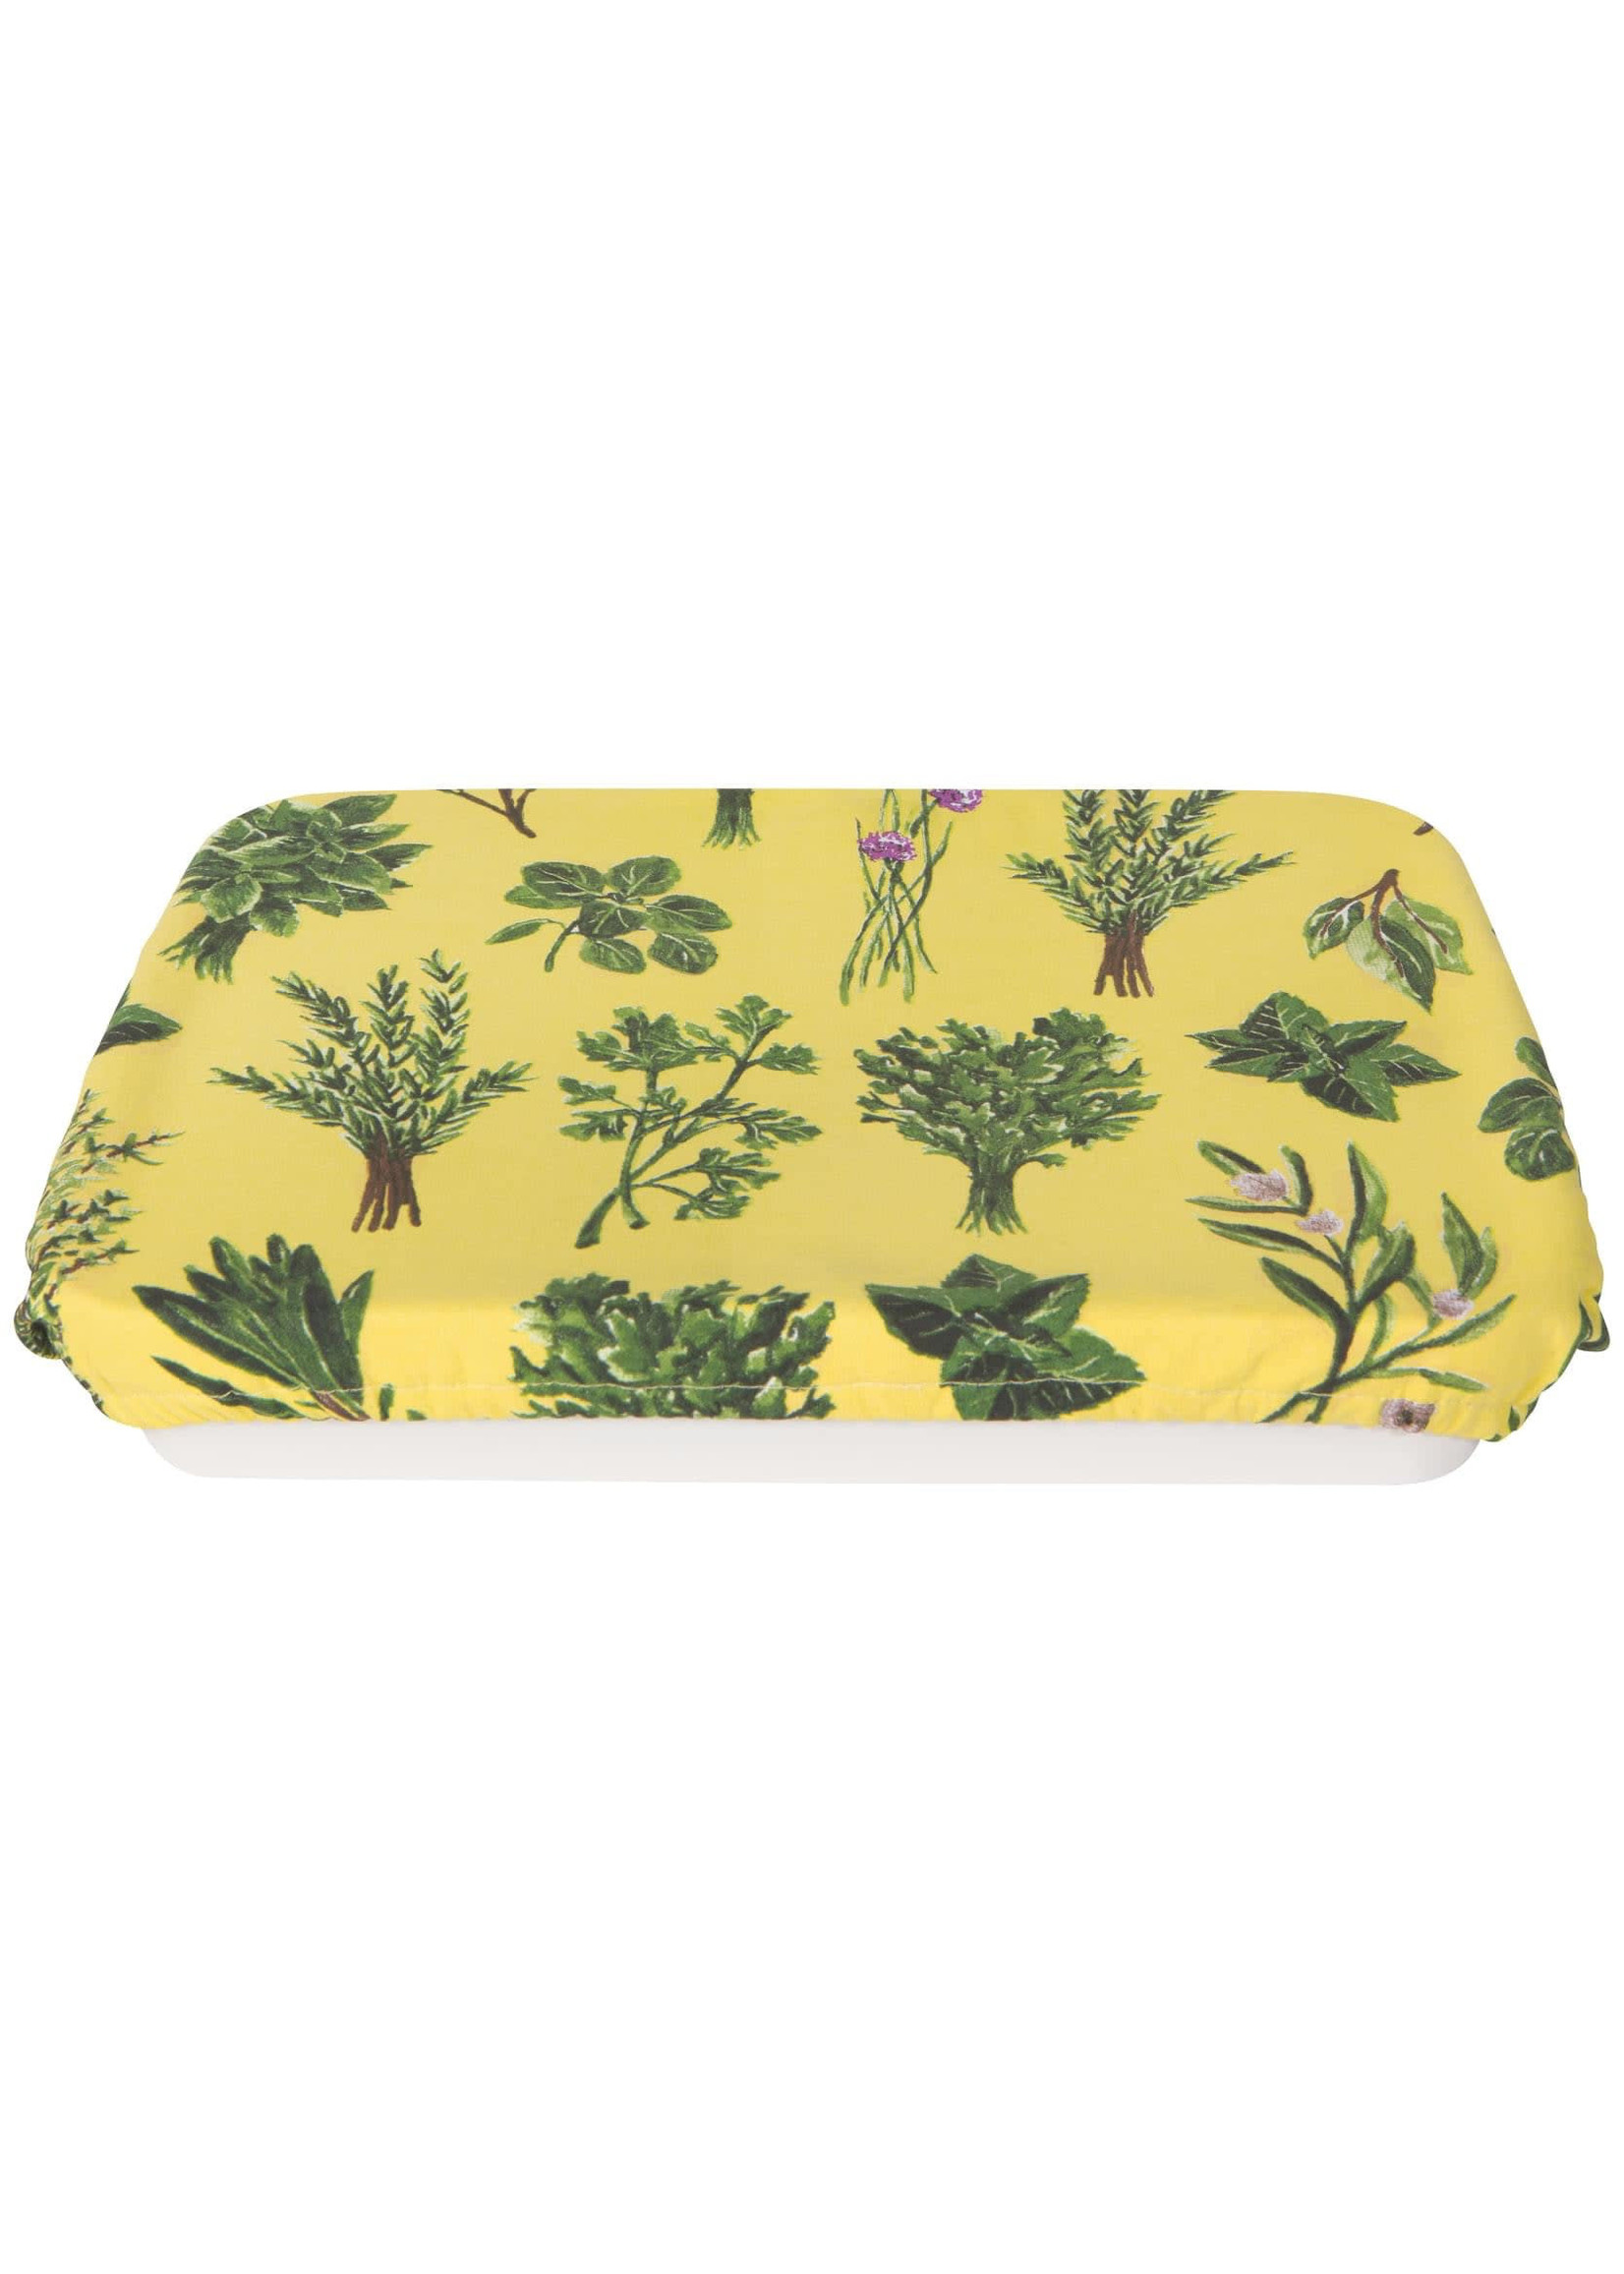 Fine Herbs Baking Dish Cover